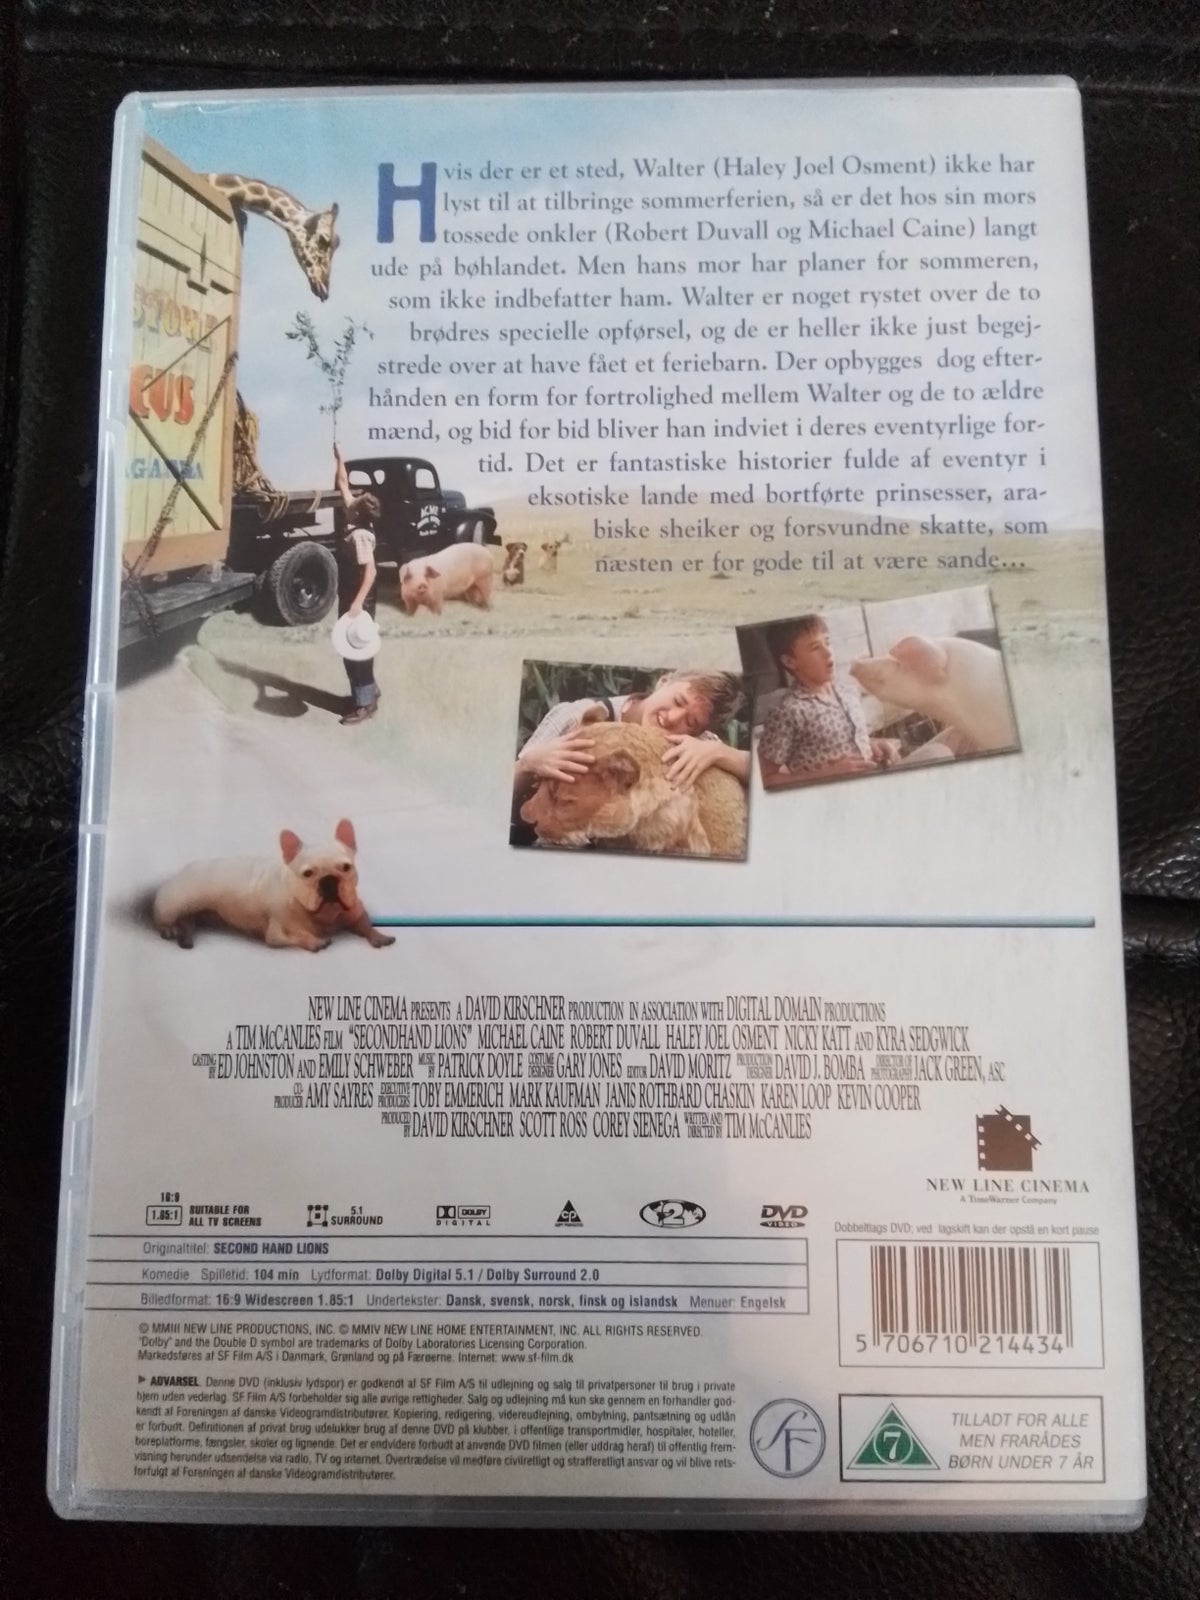 Secondhand Lions (Blu-ray) 